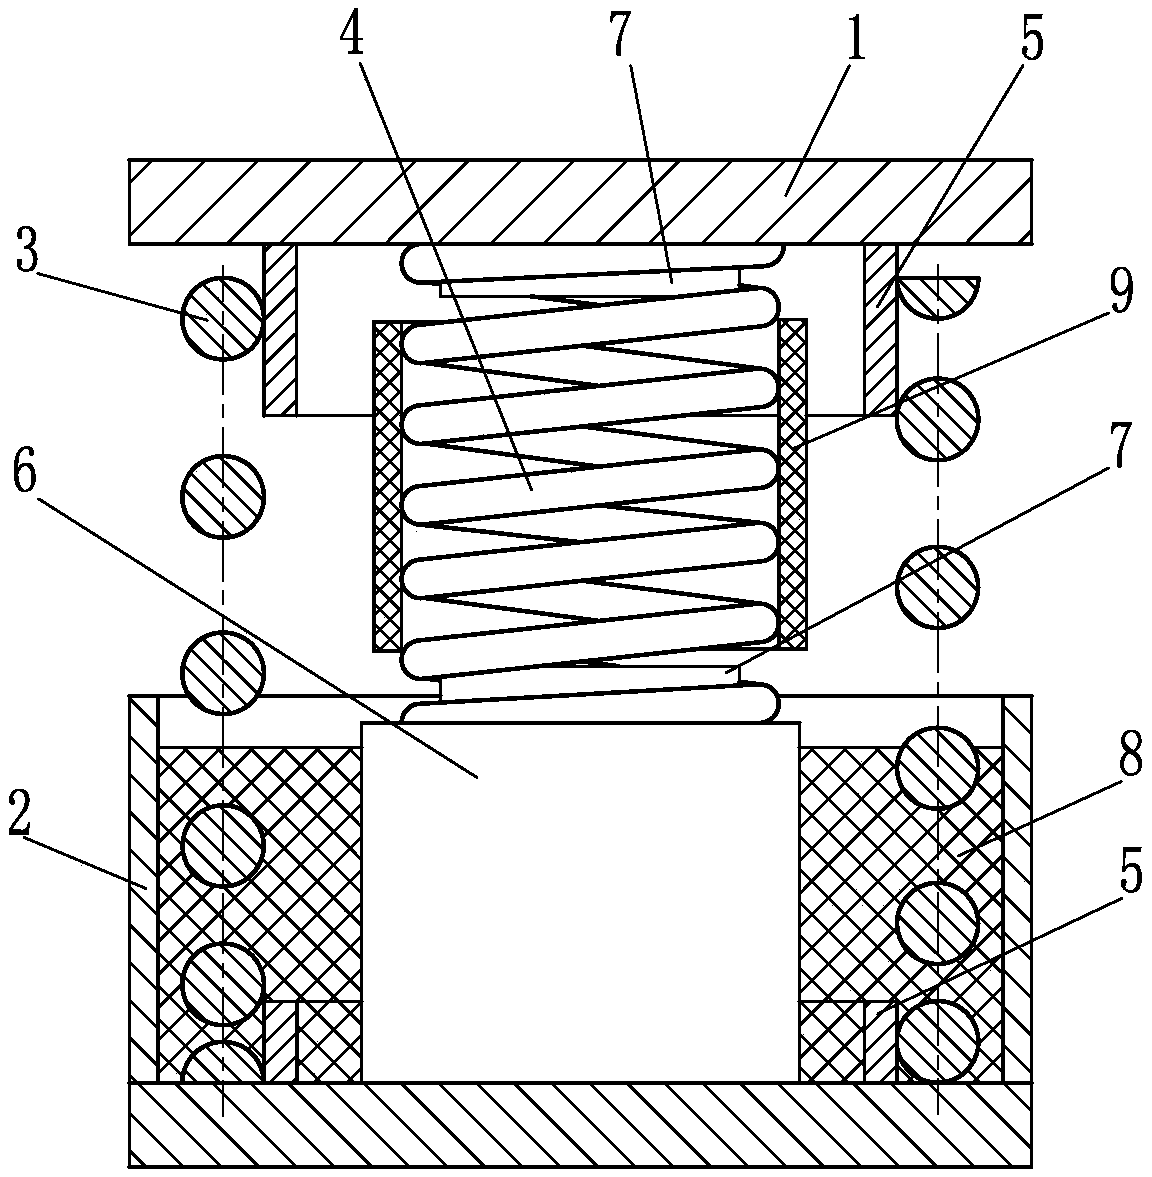 Non-linear combined spring vibration isolator